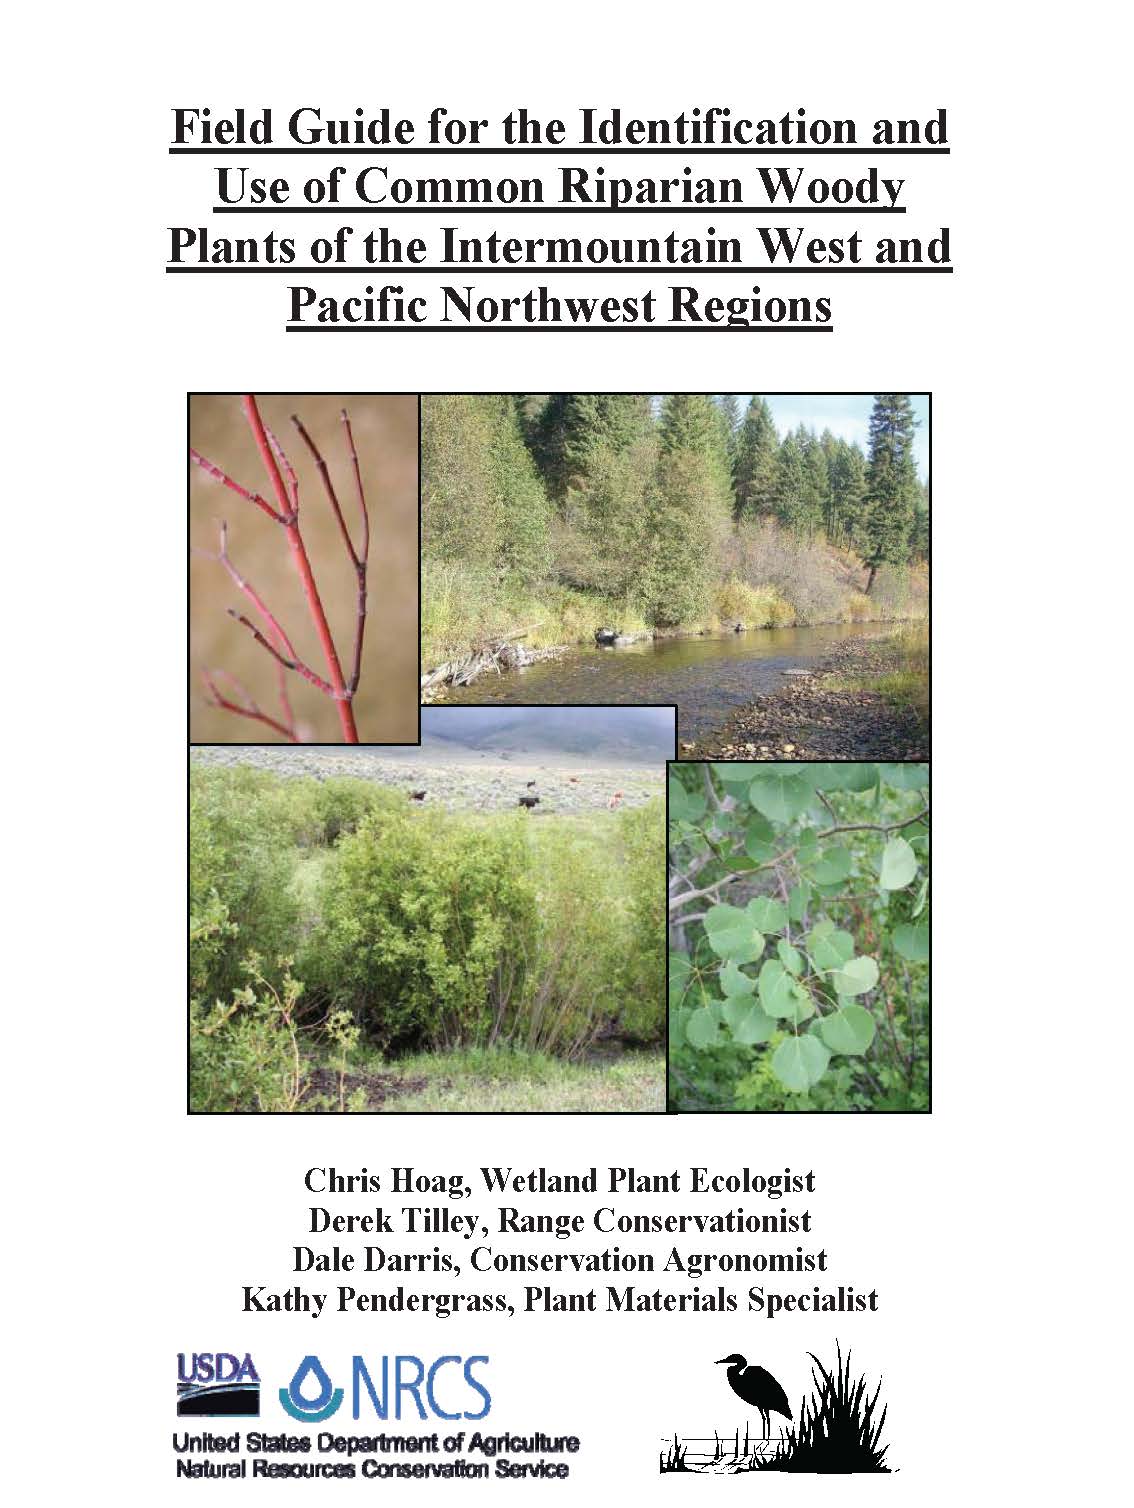 Identification and use of common riparian woody plants